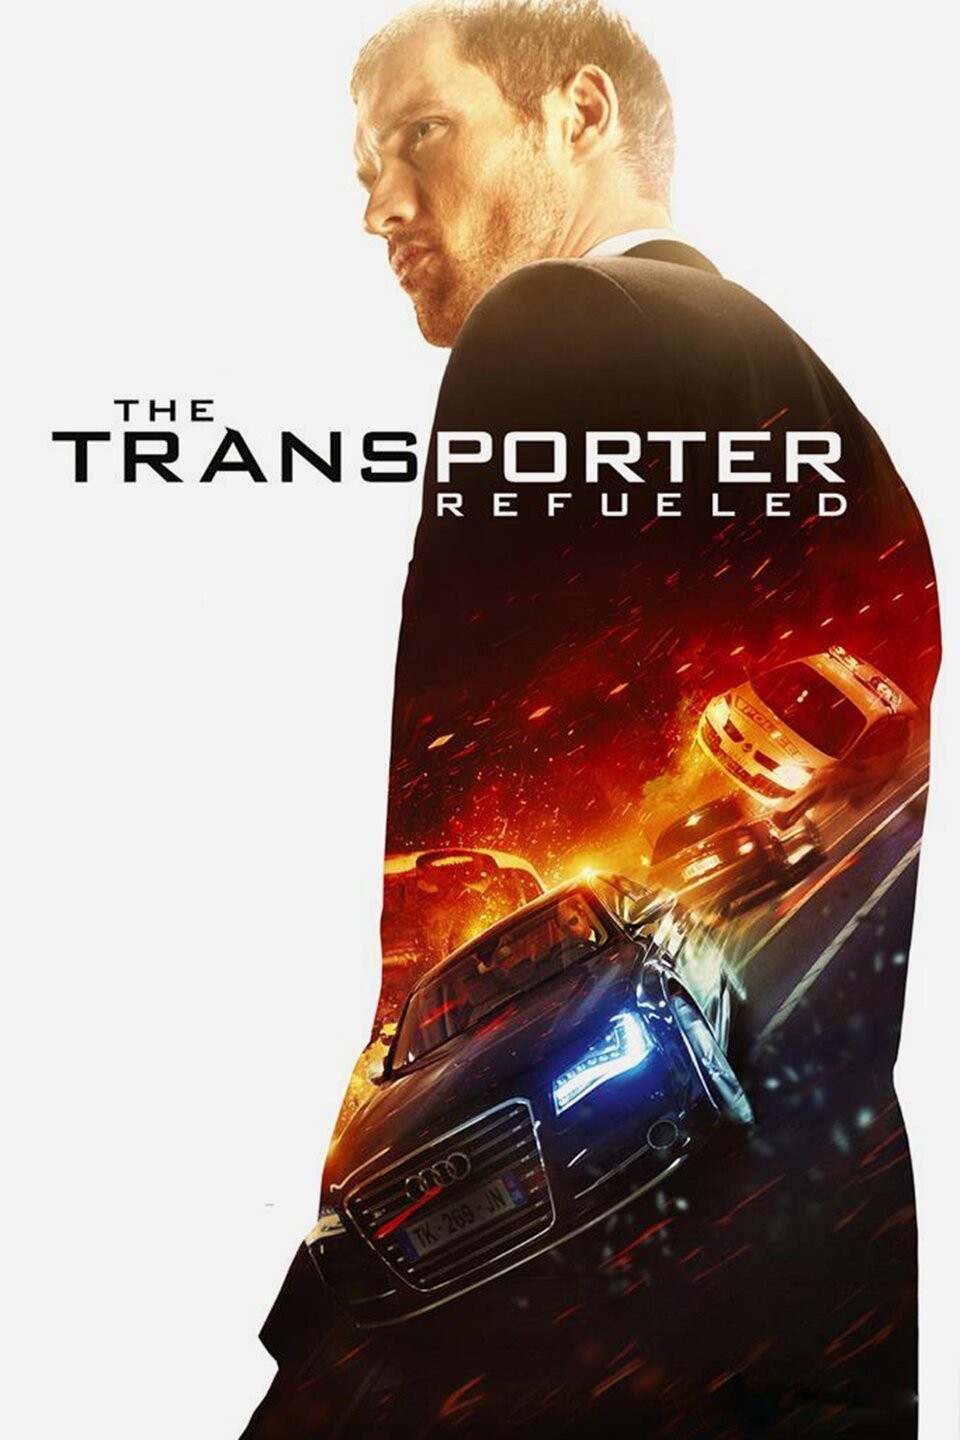 The Transporter Refueled - Rotten Tomatoes